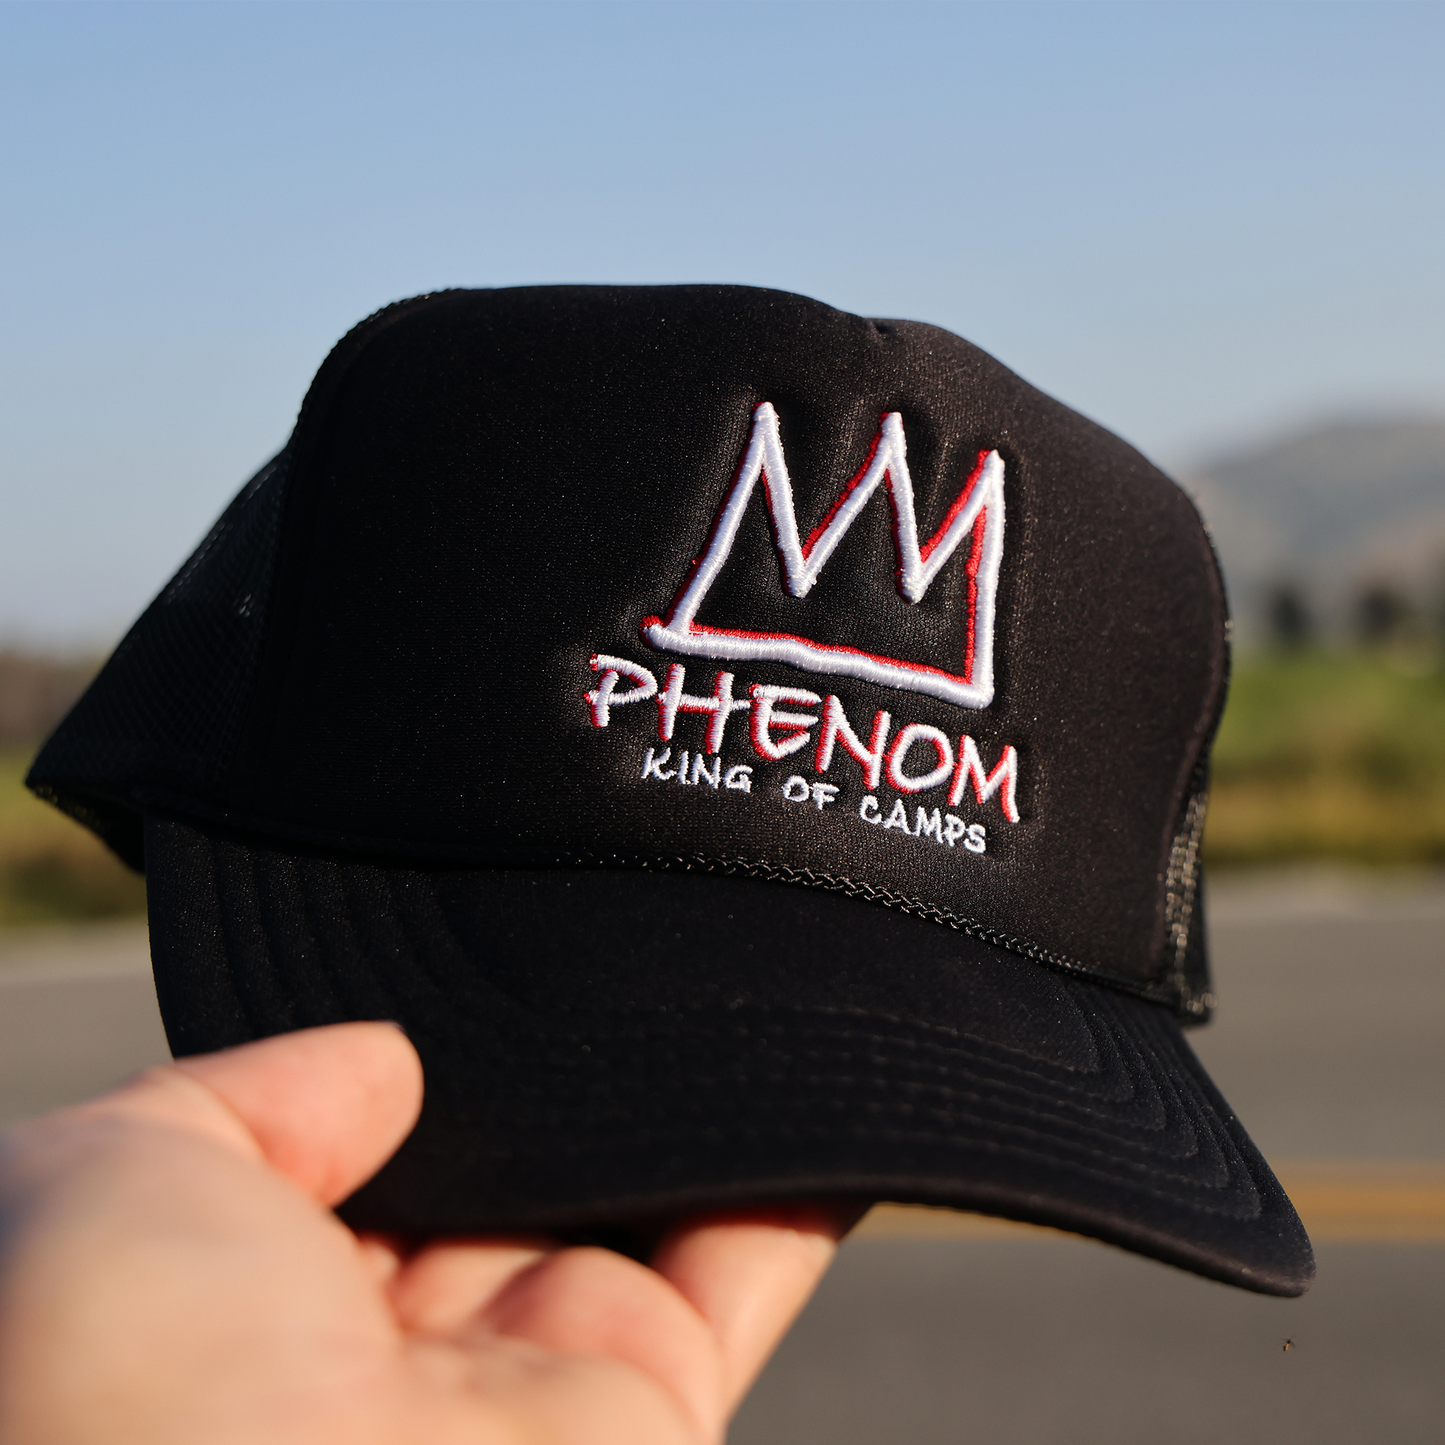 Phenom "King Of Camps" Snap Back